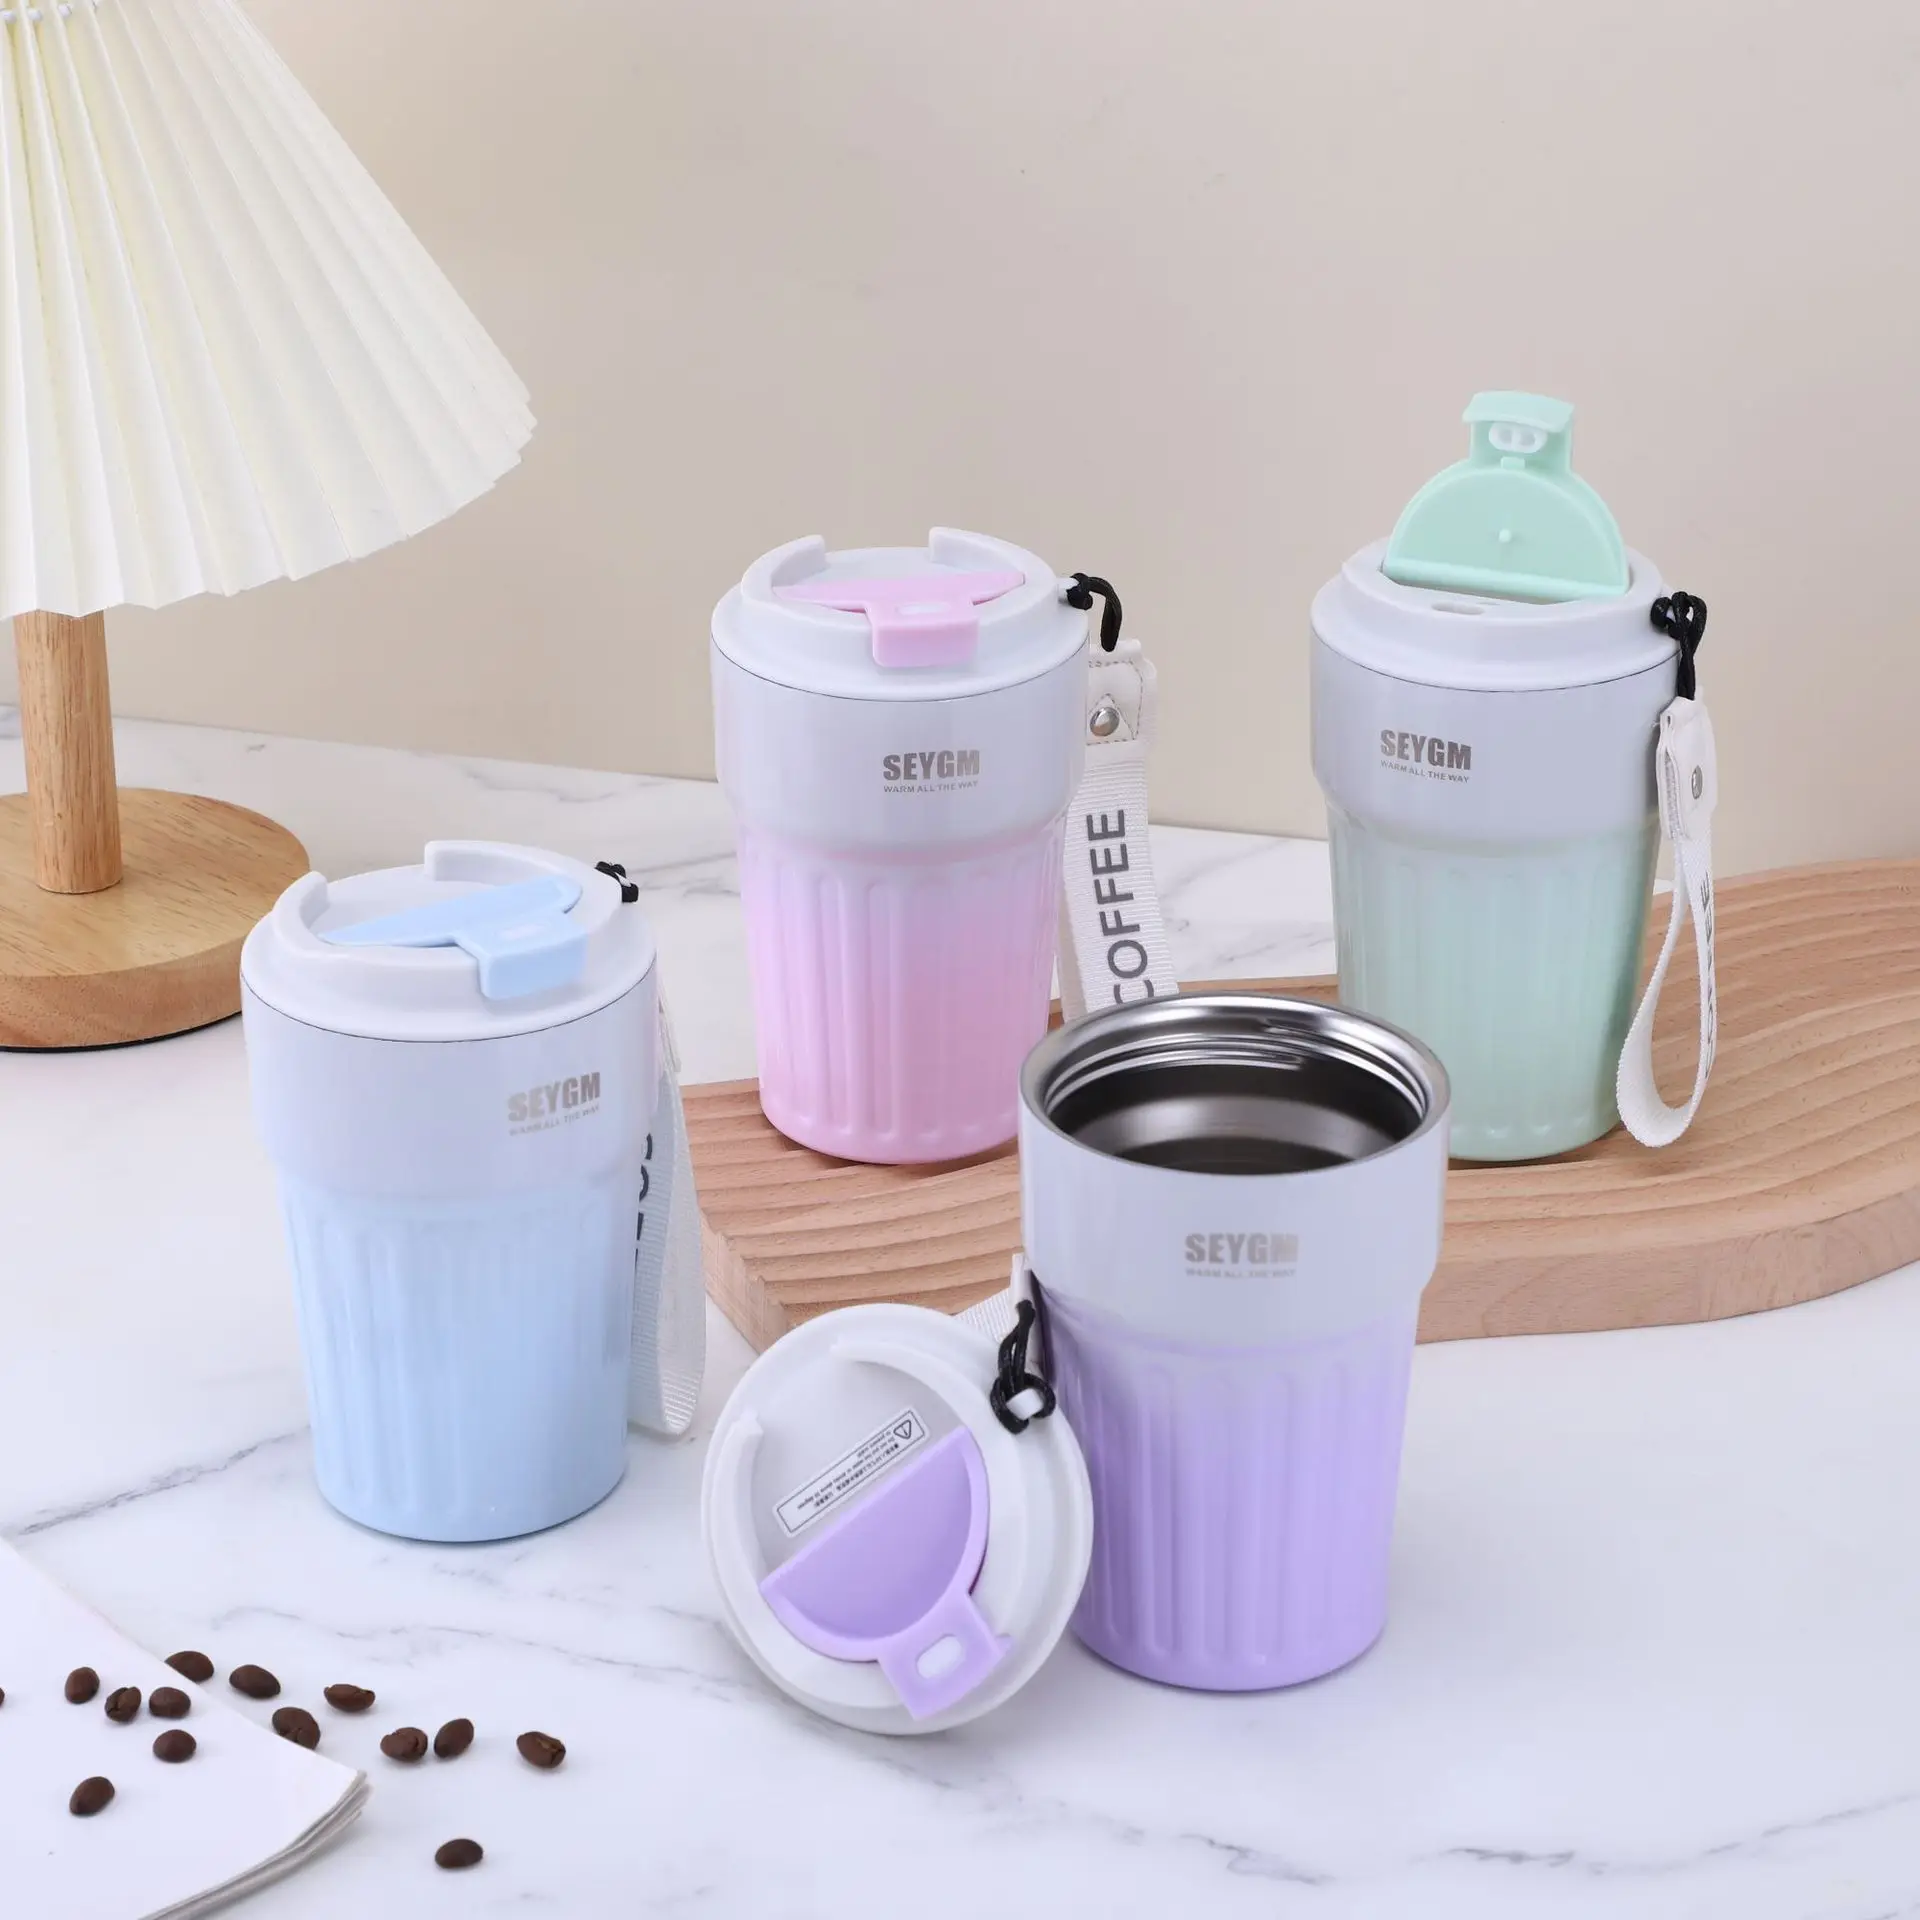 https://ae01.alicdn.com/kf/S929e801efdf24b0a88f57a4002e148d9V/12oz-Thermo-Cafe-Car-Thermos-Mug-for-Tea-Water-Coffee-Leak-Proof-Travel-Thermo-Cup-Coffee.jpg